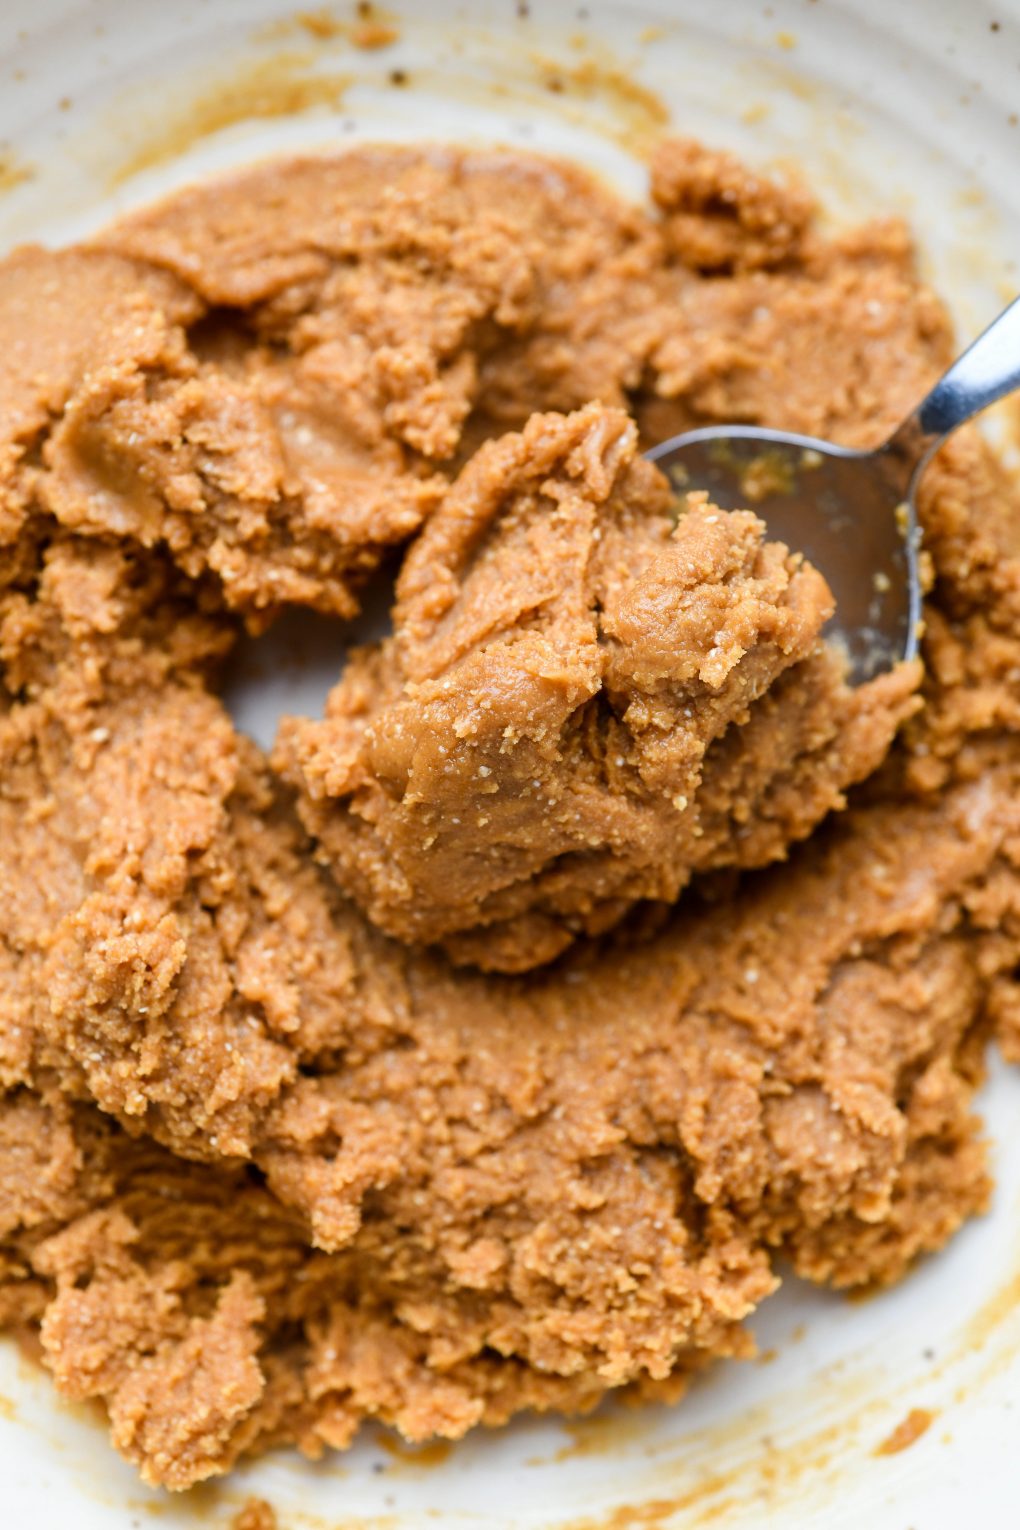 A spoonful of the mixed and thickened chocolate peanut butter no bake cookie dough